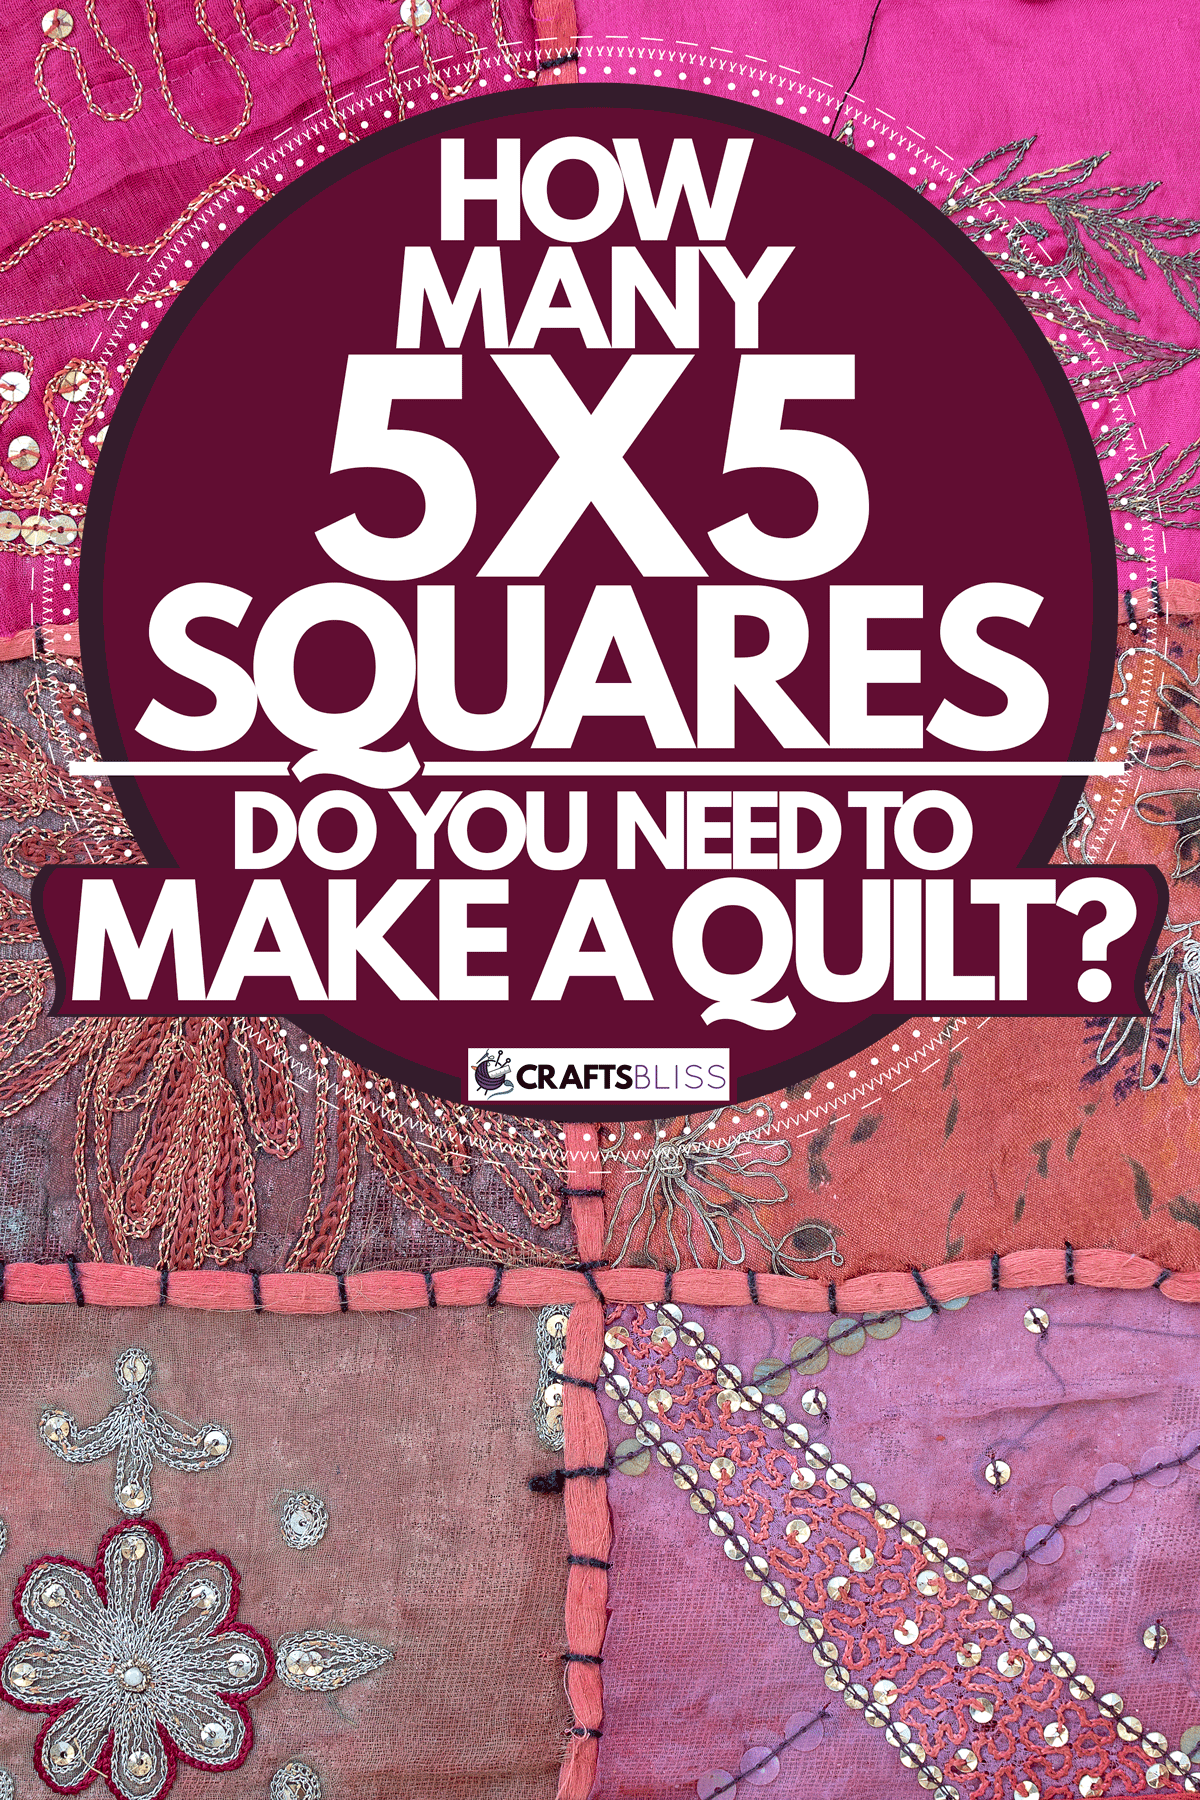 Calculating The Number Of 5-Inch Squares Needed For A Queen Size Quilt